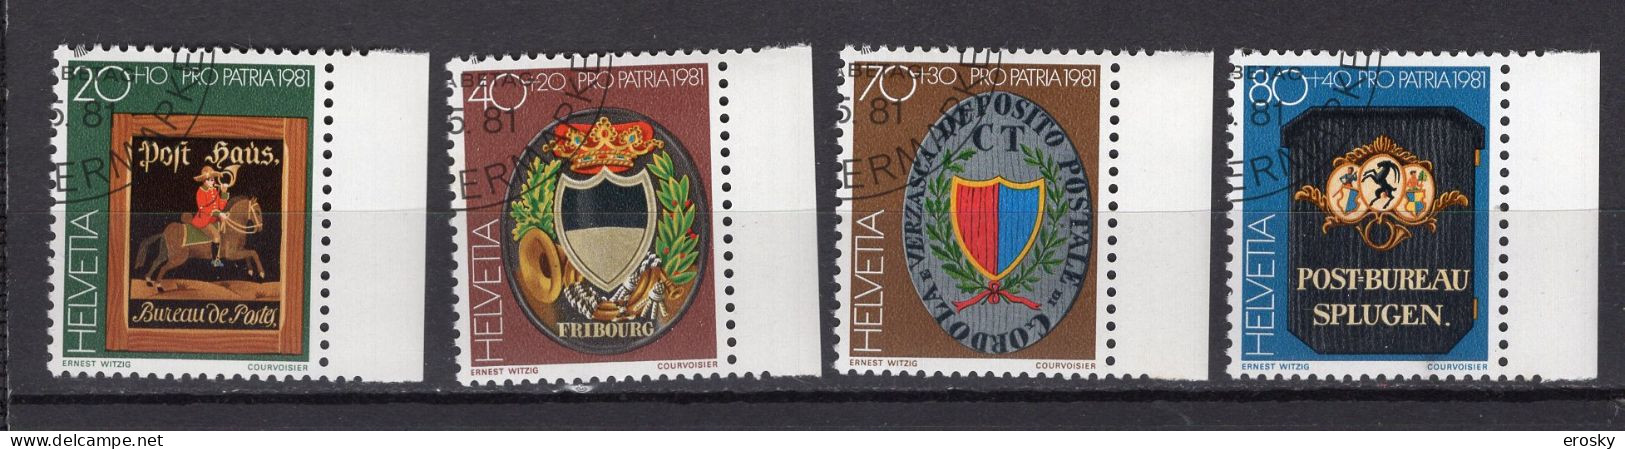 T3212 - SUISSE SWITZERLAND Yv N°1128/31 Pro Patria Fete Nationale - Used Stamps